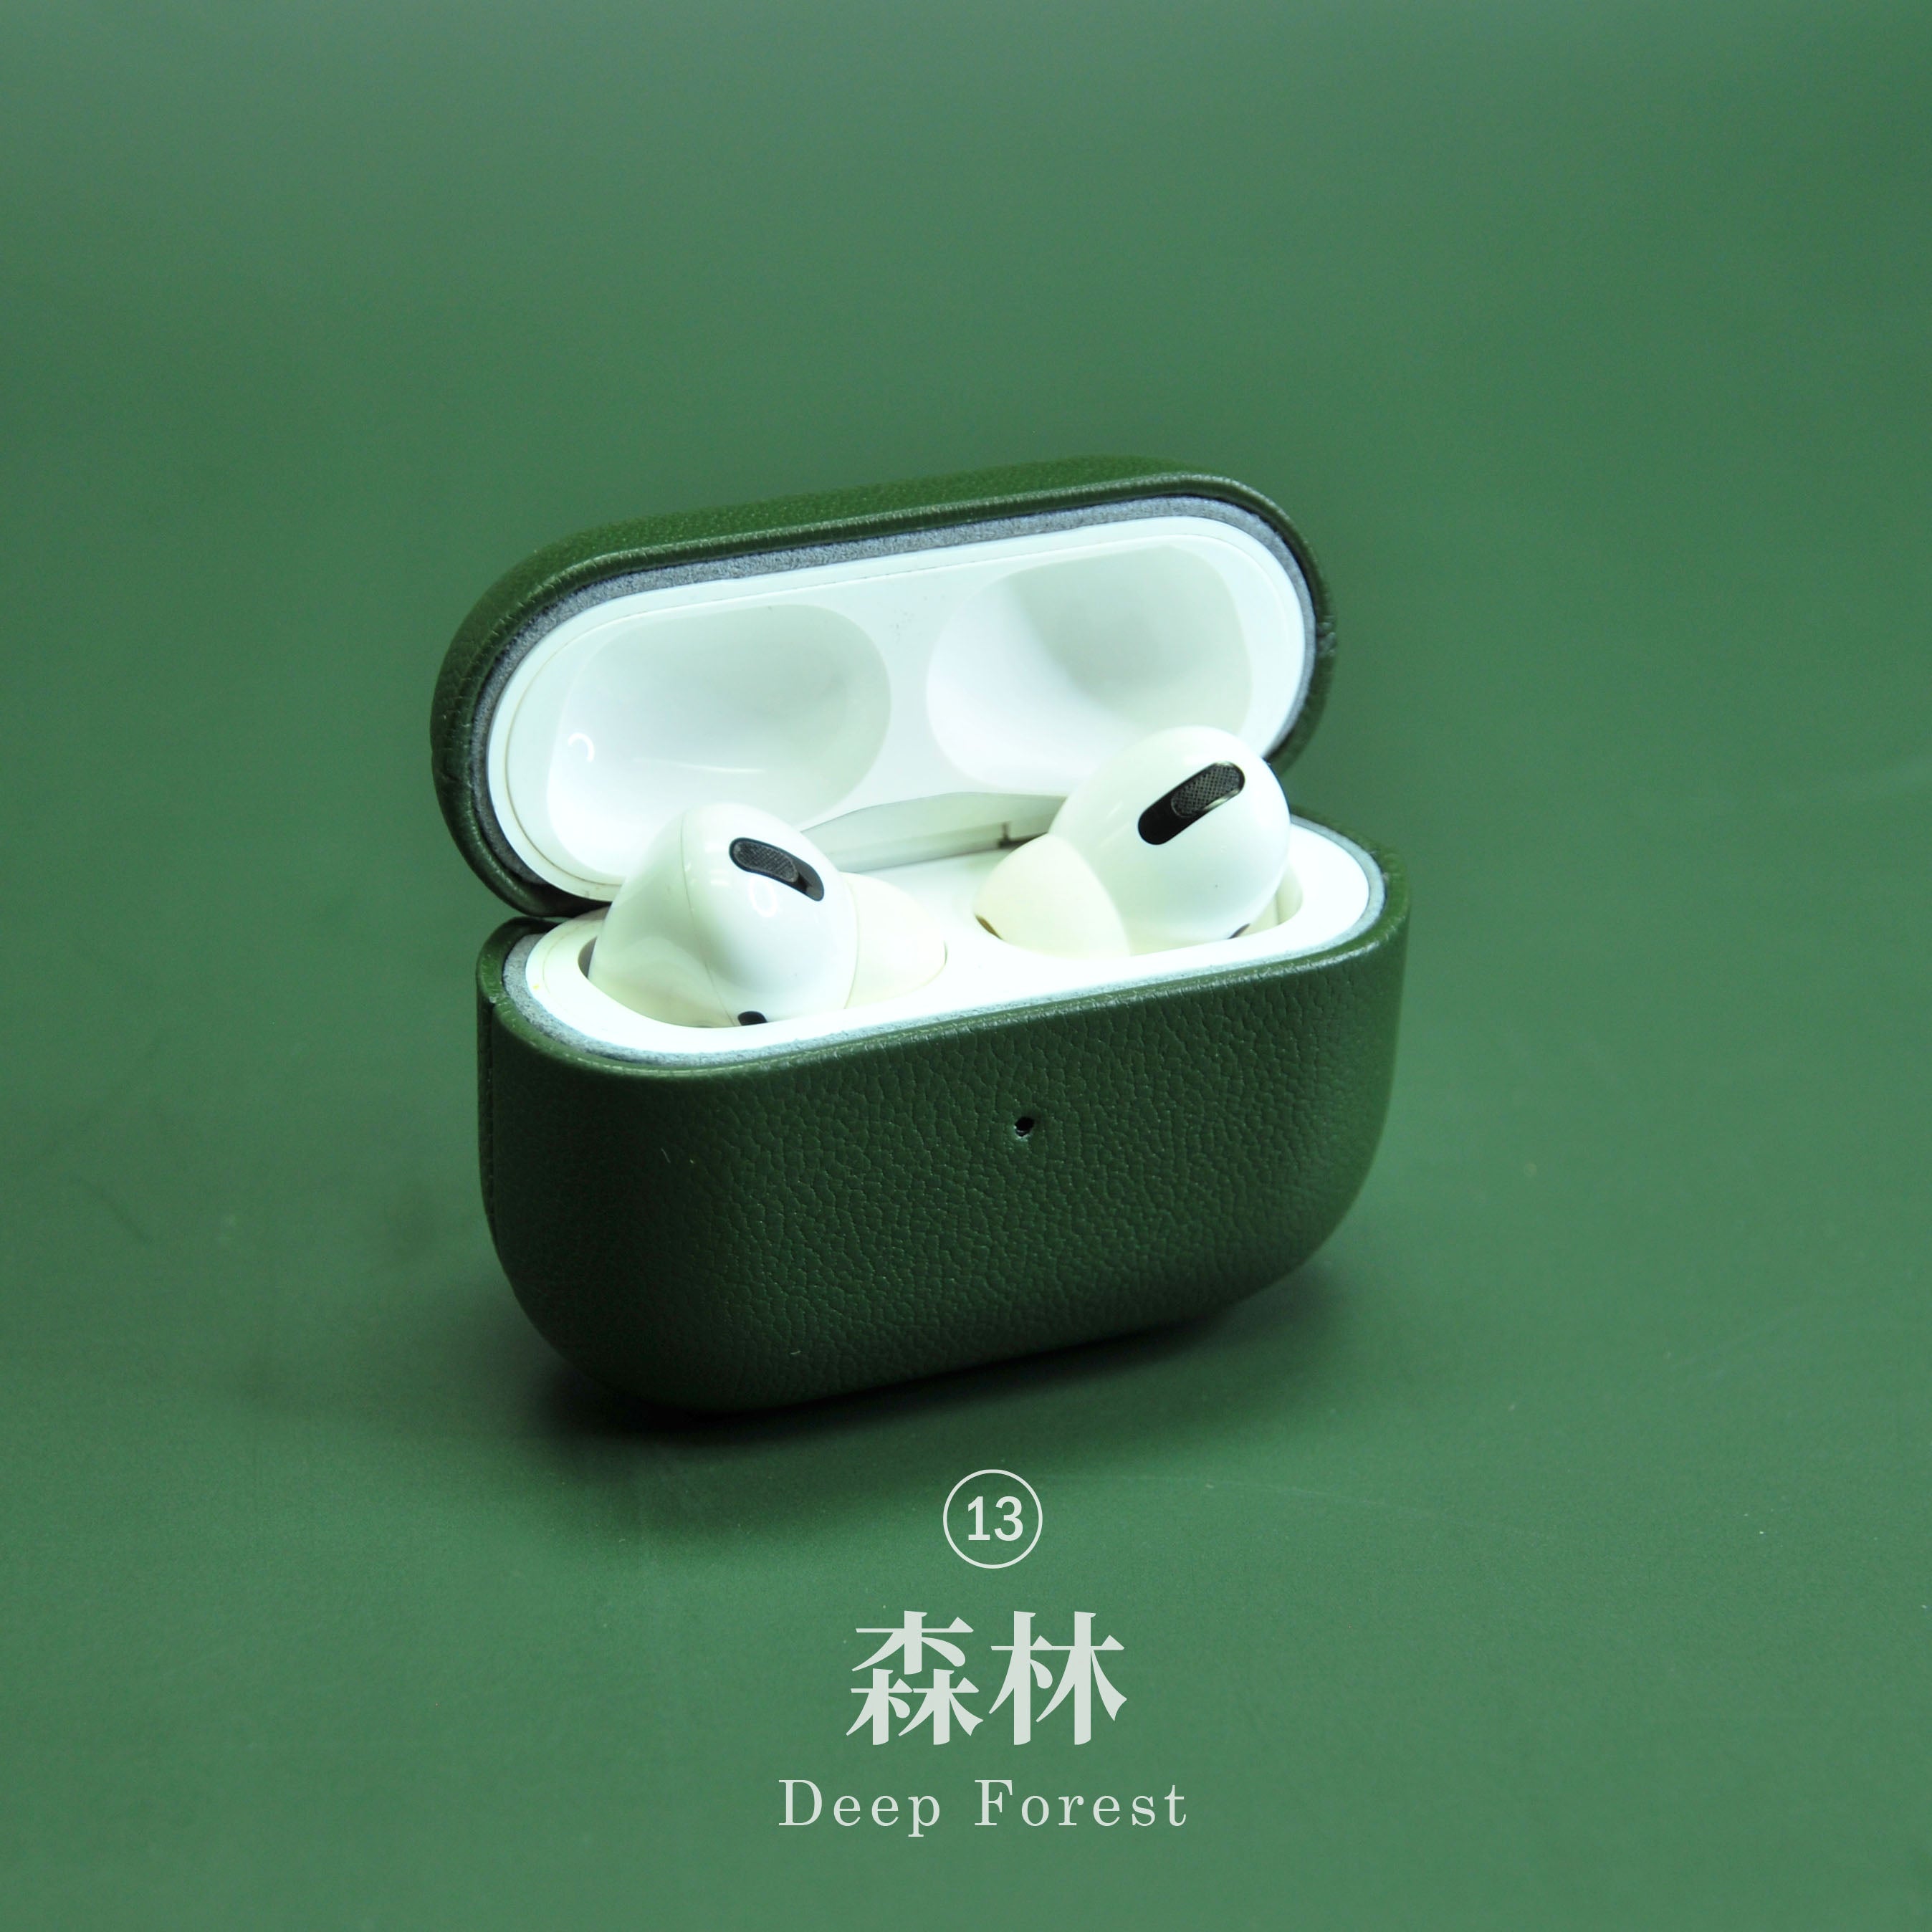 Genuine Leather AirPods Pro Case - Green Series